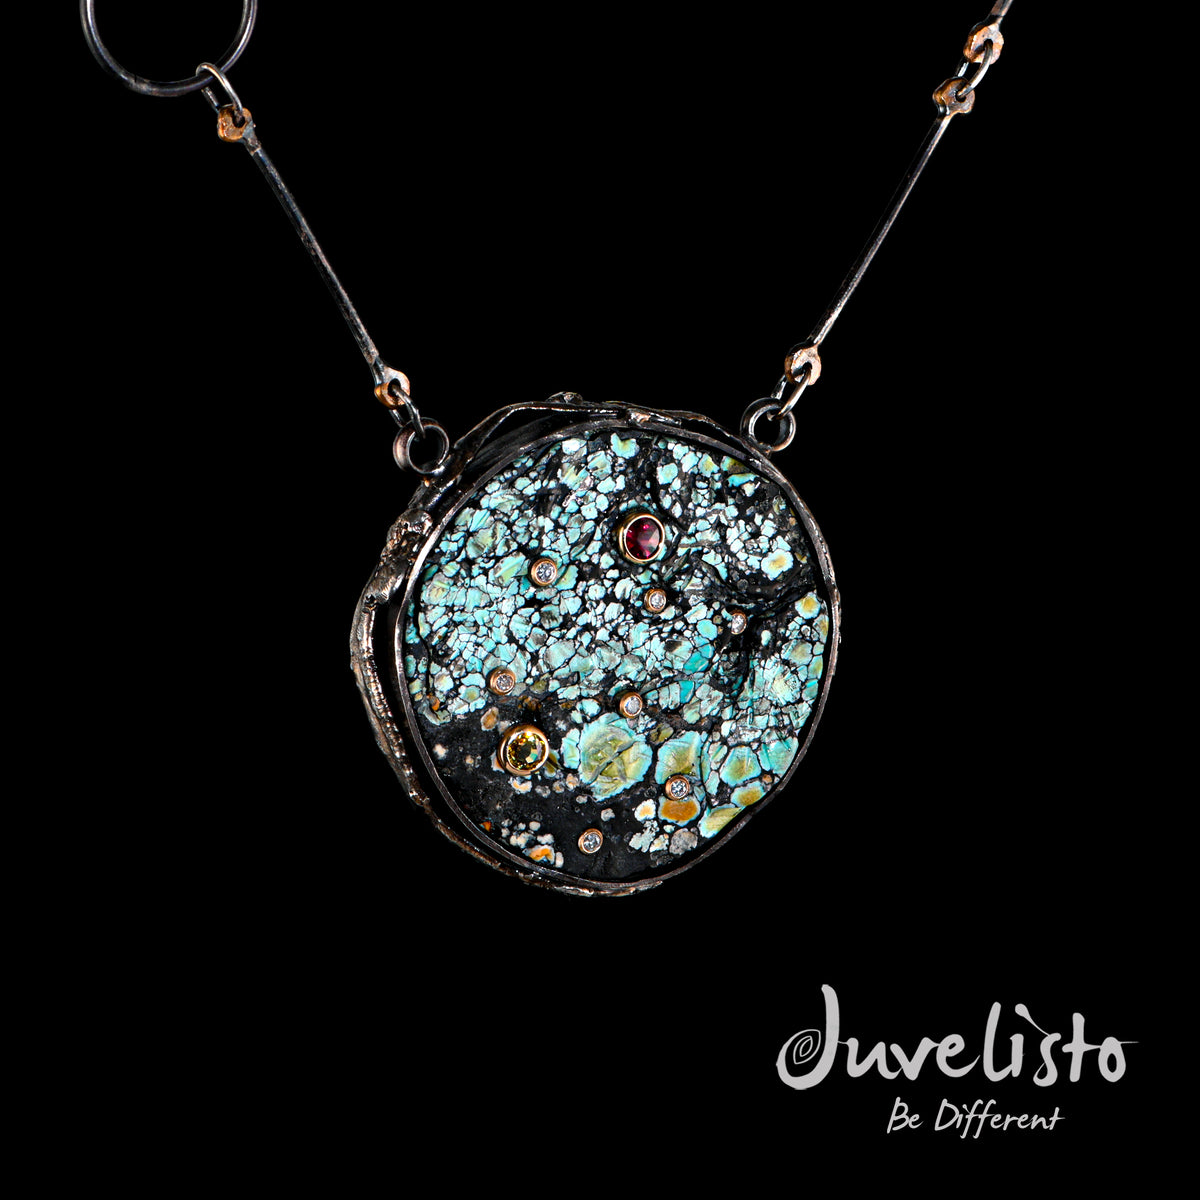 Juvelisto Design | Turquoise Pendant Necklace with Diamonds, Sapphire and Garnet